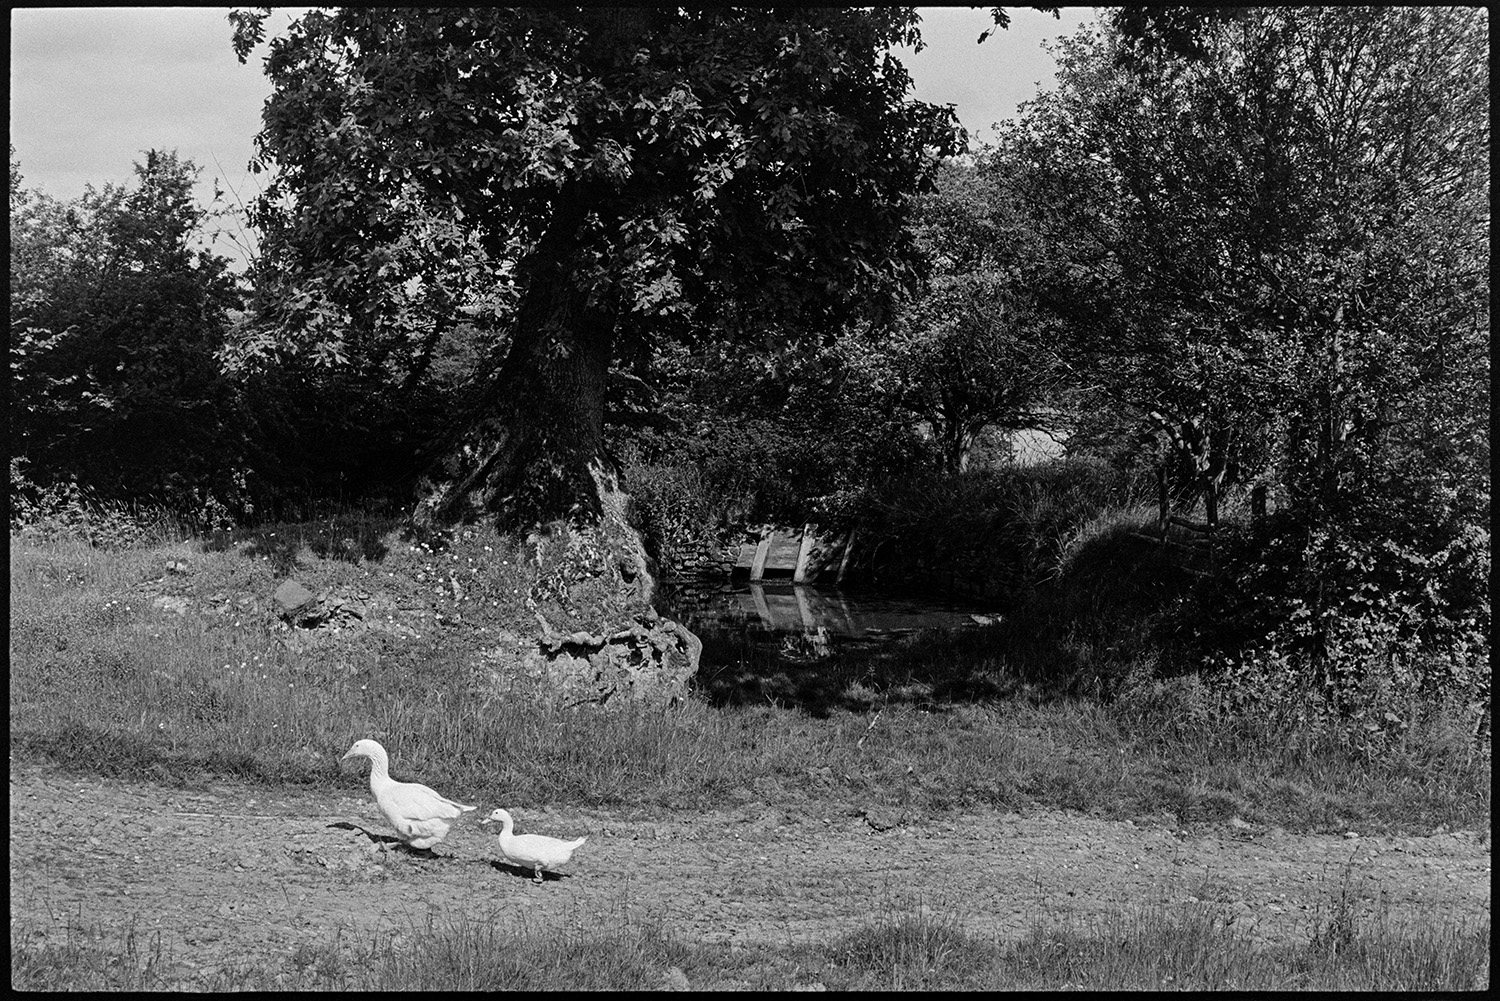 Ducks and pond, old hedge. 
[Two ducks walking by a pond and hedgerow near Bridge Reeve, Chulmleigh.]